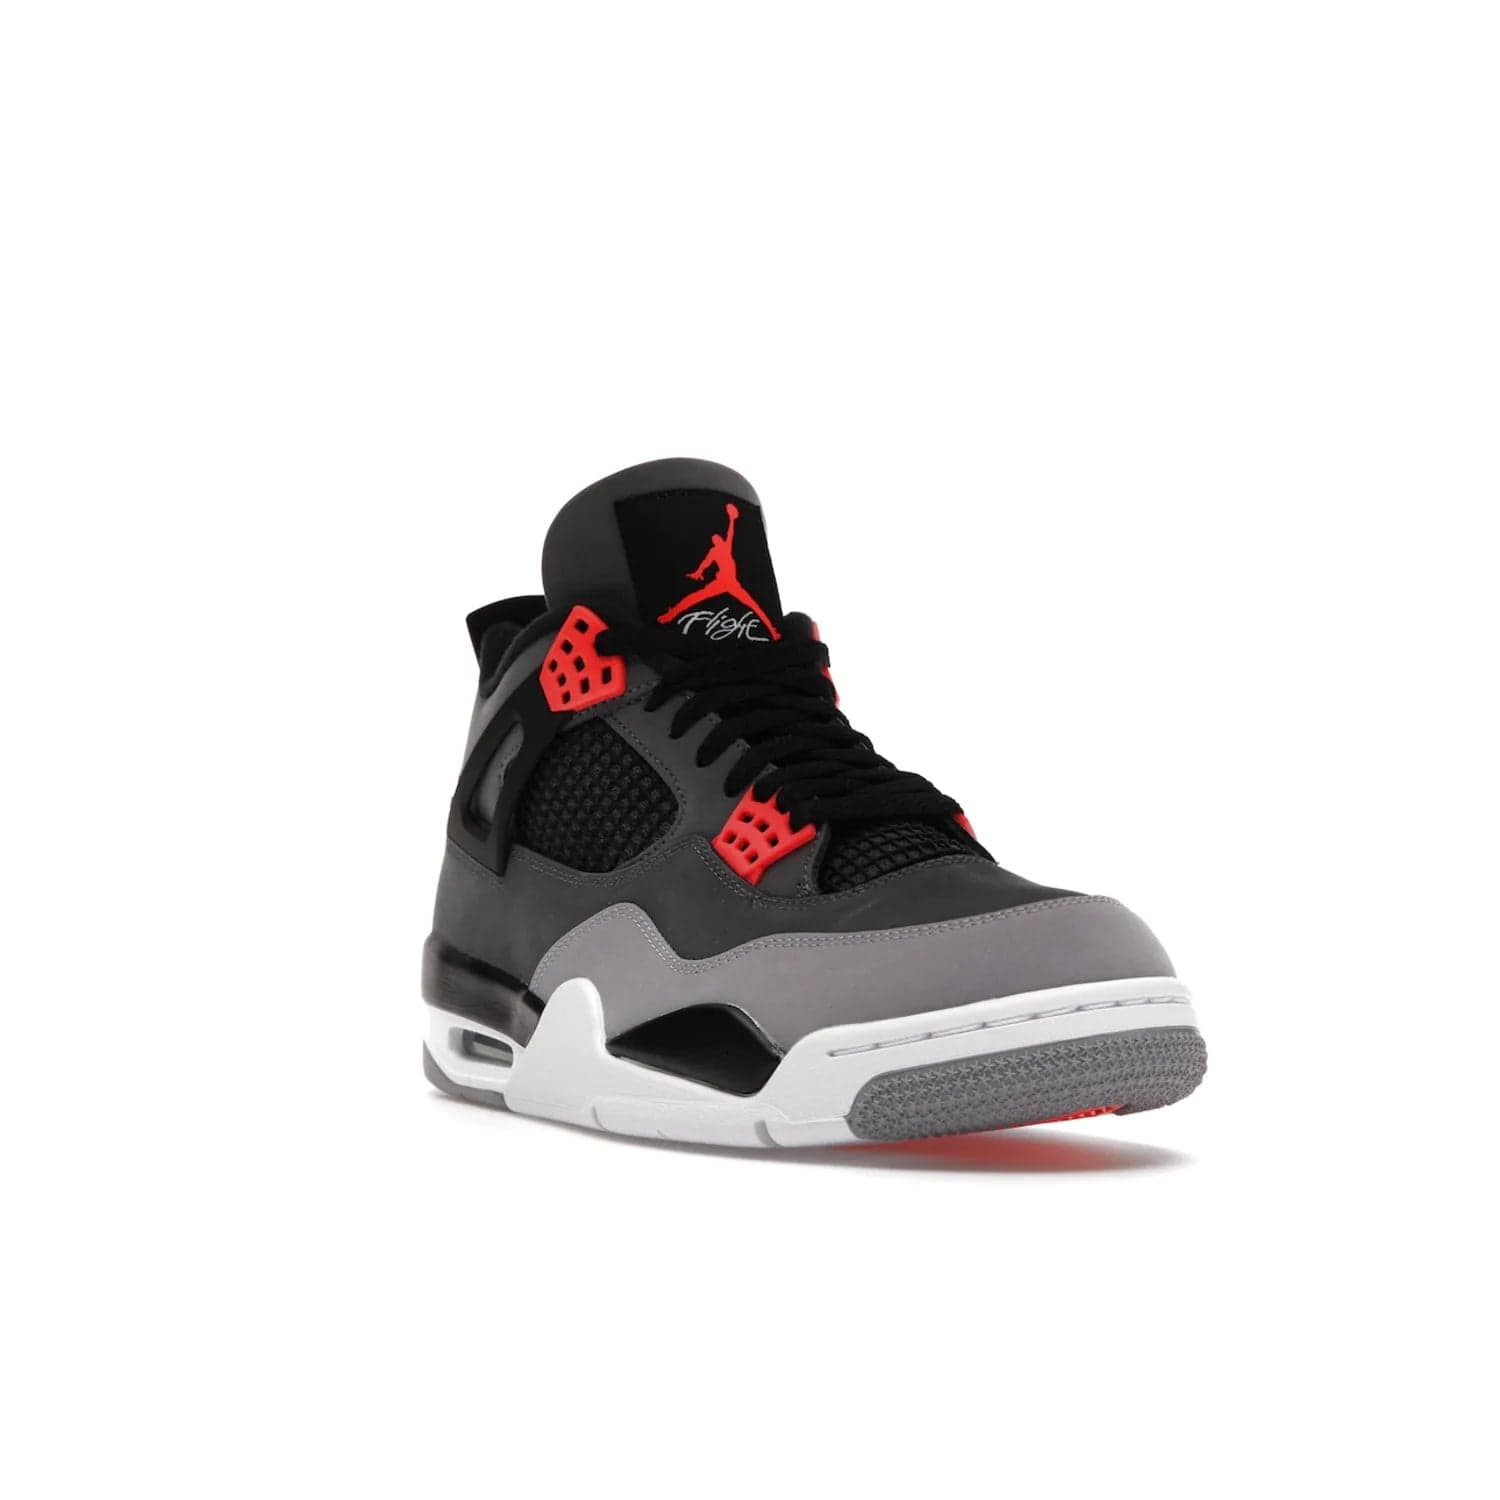 Jordan 4 Retro Infrared - Image 7 - Only at www.BallersClubKickz.com - Introducing the classic & timeless Air Jordan 4 Infrared. Durabuck upper, TPU mesh inserts, tech straps & heel tabs in dark grey and infrared accents. White sole with visible Air units. Out June 15, 2022. Get your pair now!